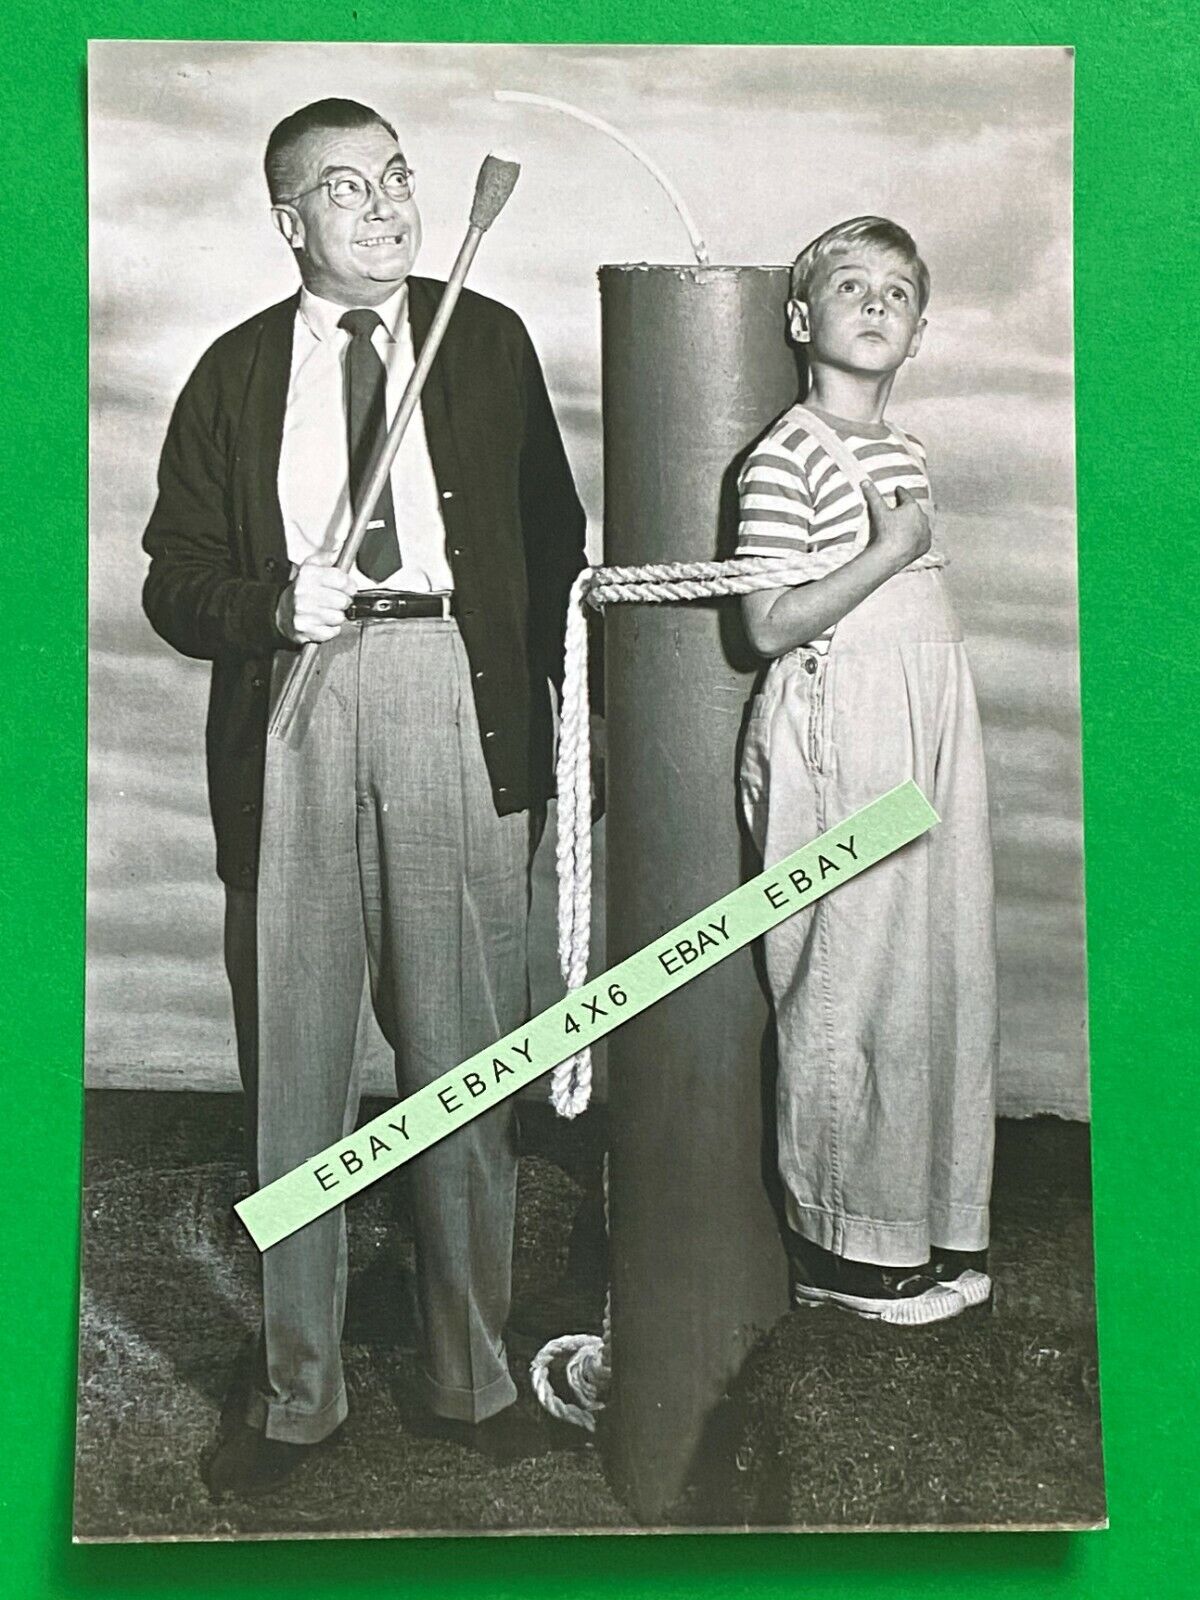 Found 4X6 PHOTO of Dennis the Menace TV Show Actor Jay North with Mr. Wilson